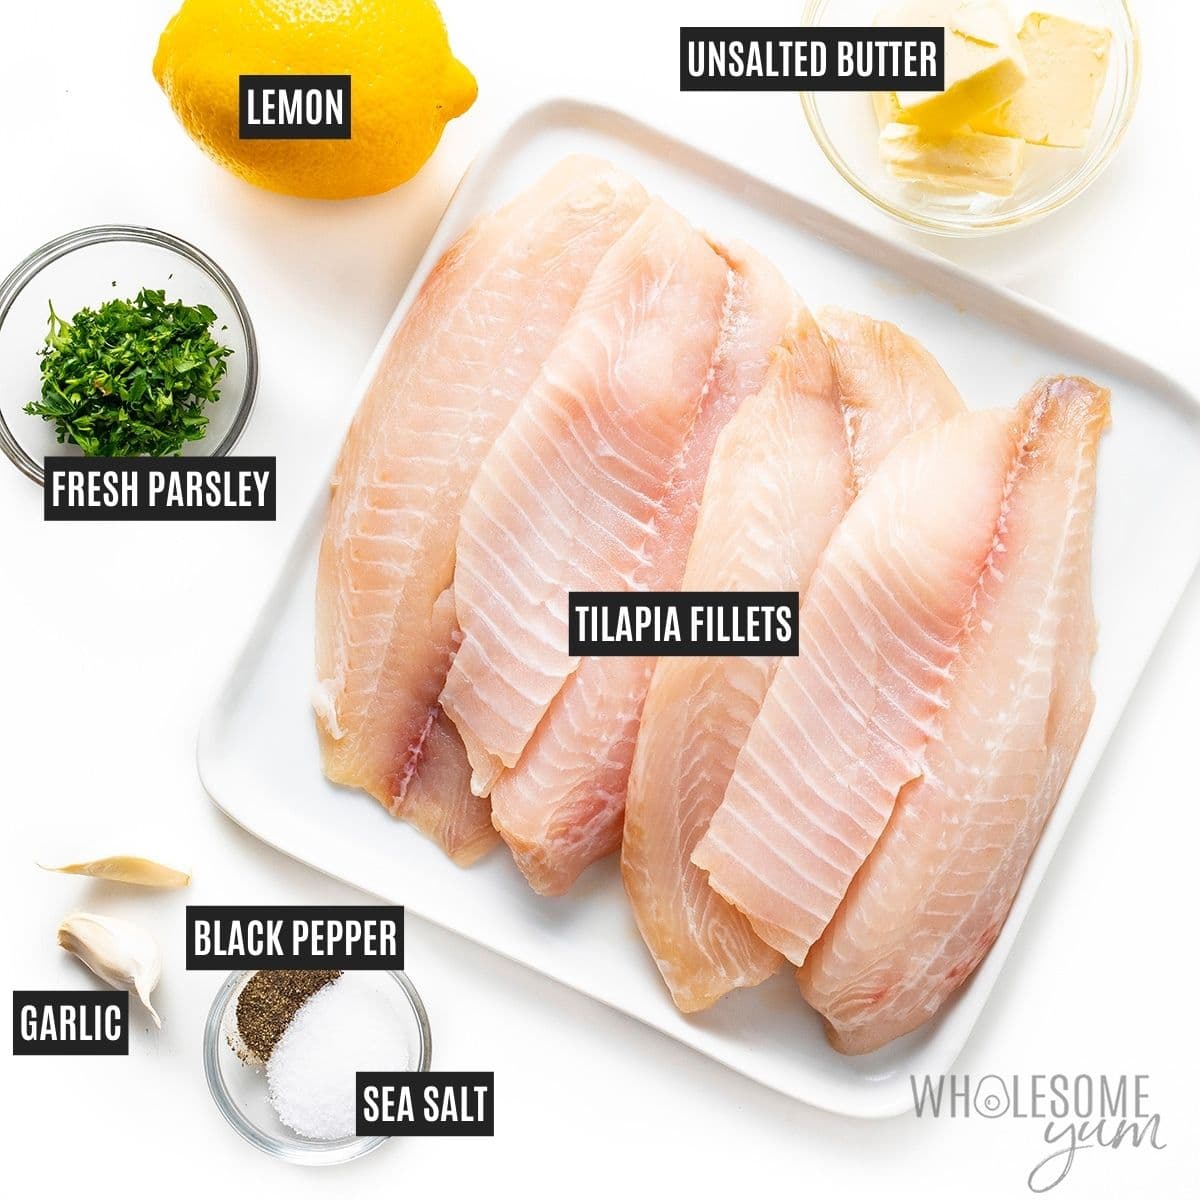 Fish and other ingredients in bowls.